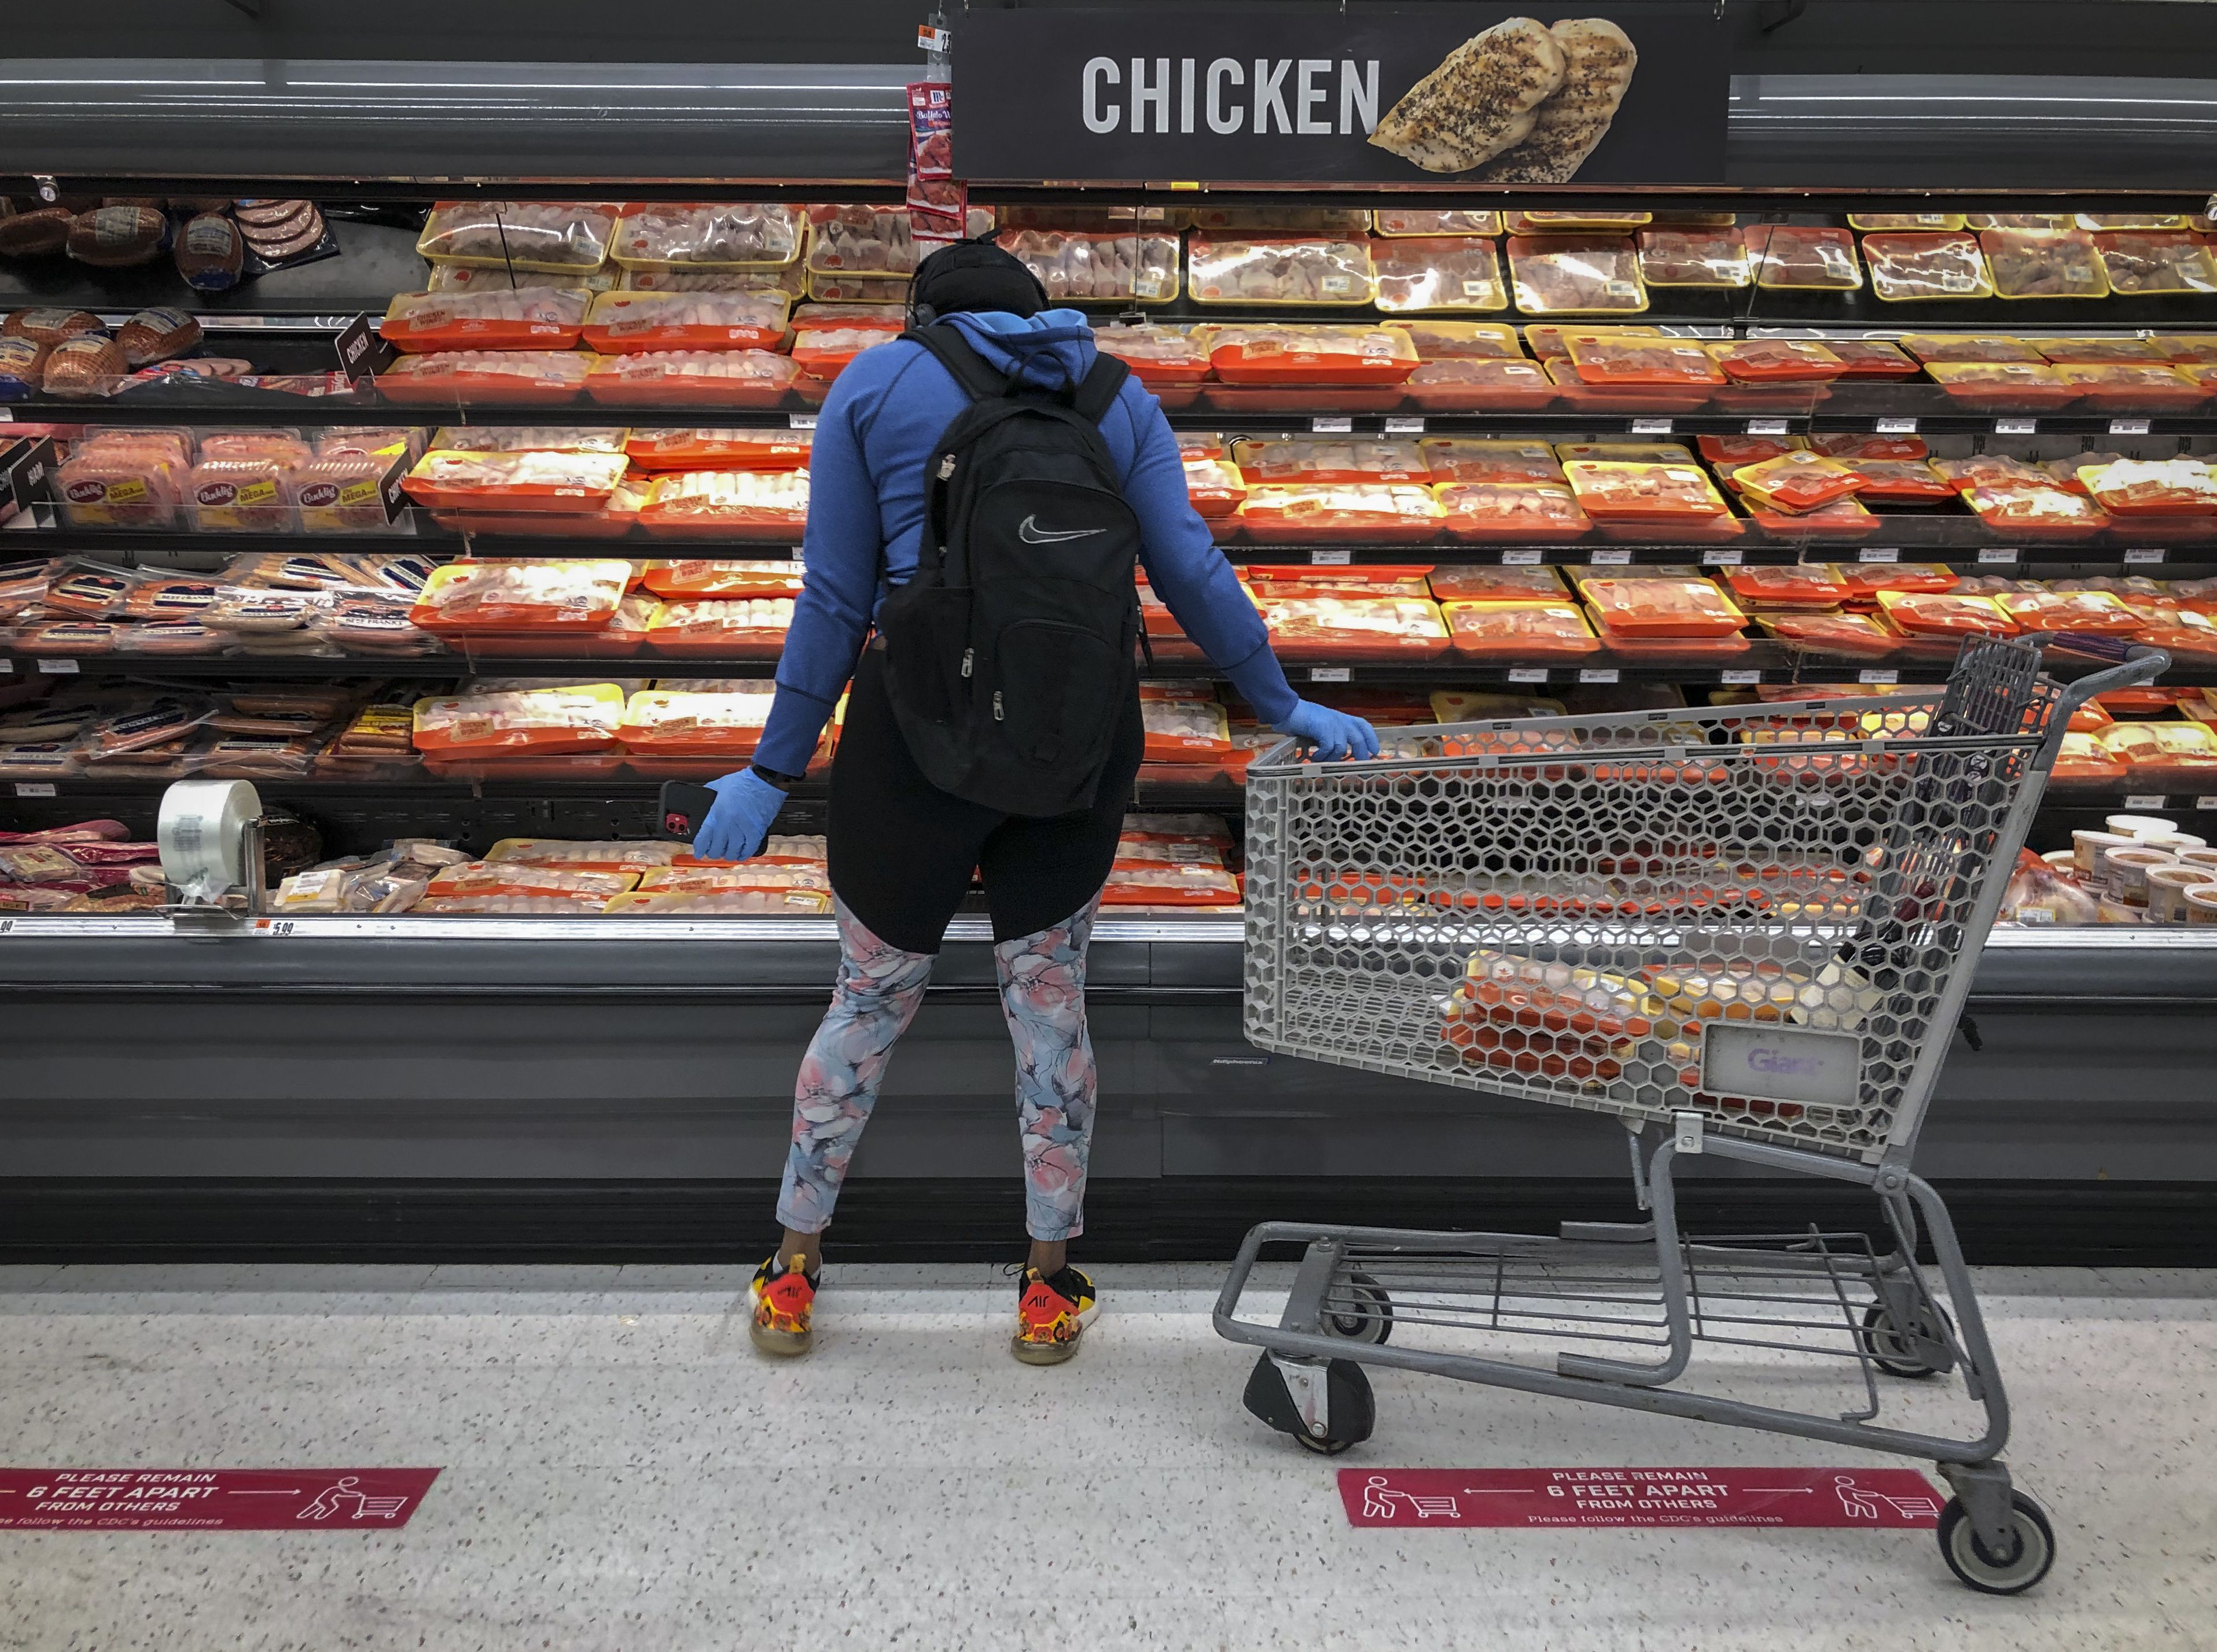 Coming to a grocery store near you: meat shortages - The Boston Globe